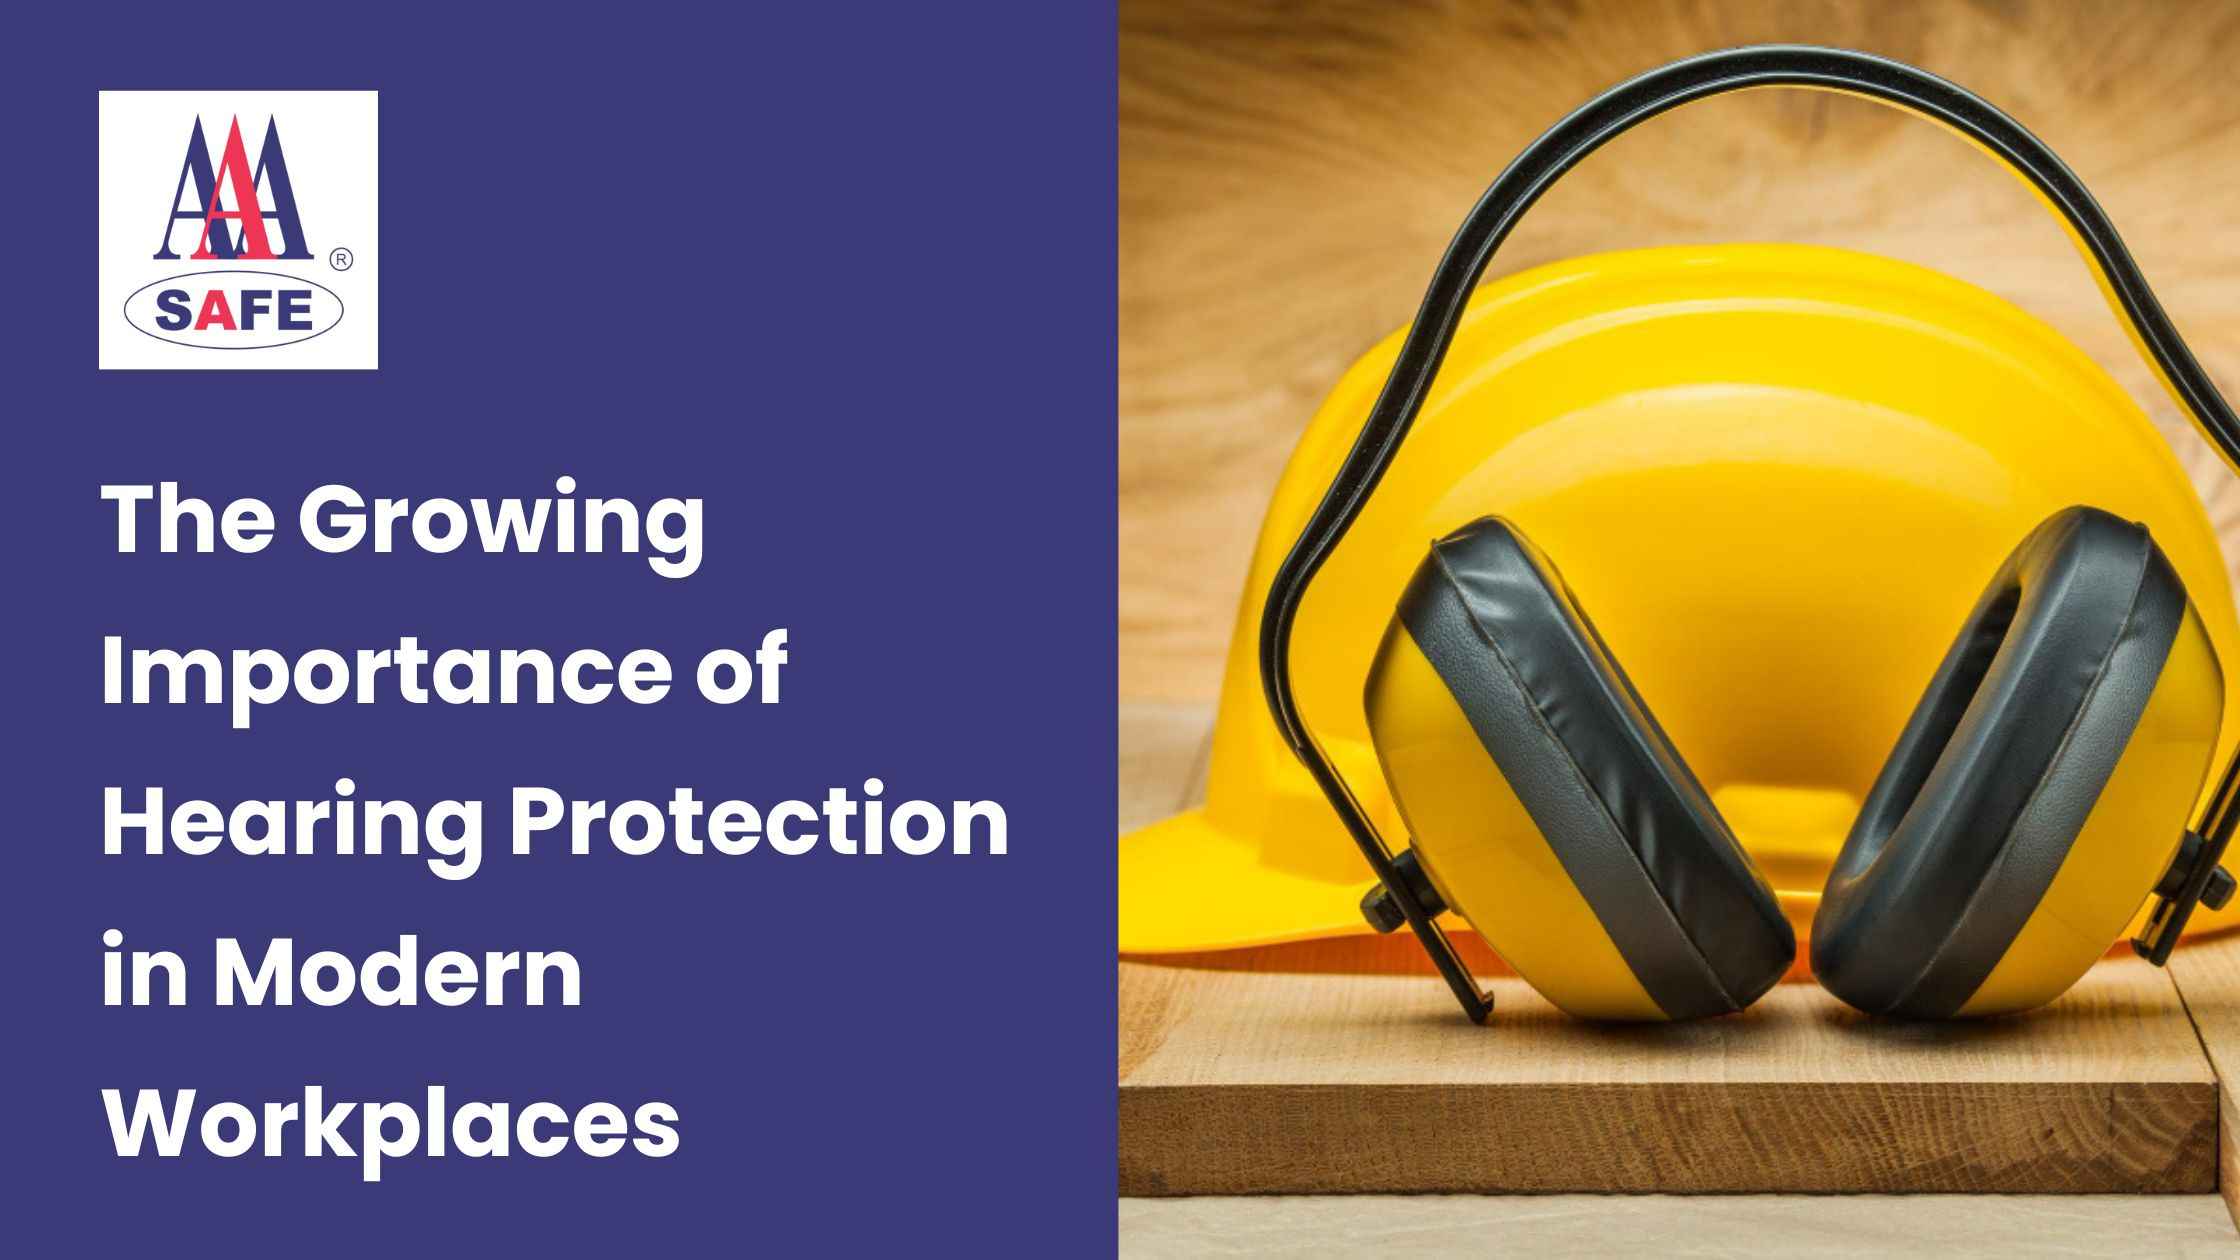 The Growing Importance of Hearing Protection in Modern Workplaces